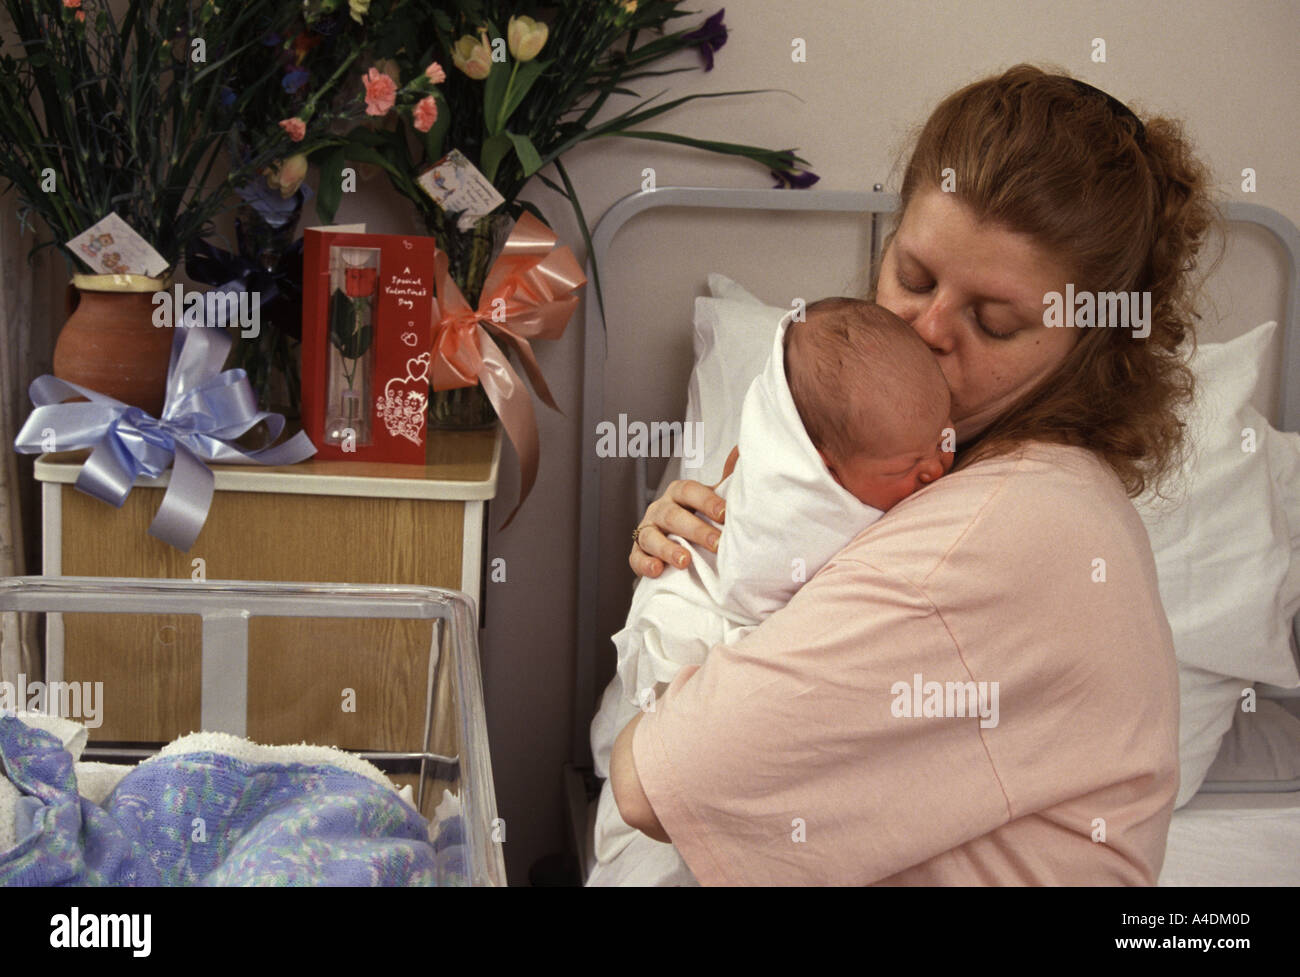 Mother and baby in maternity ward Stock Photo